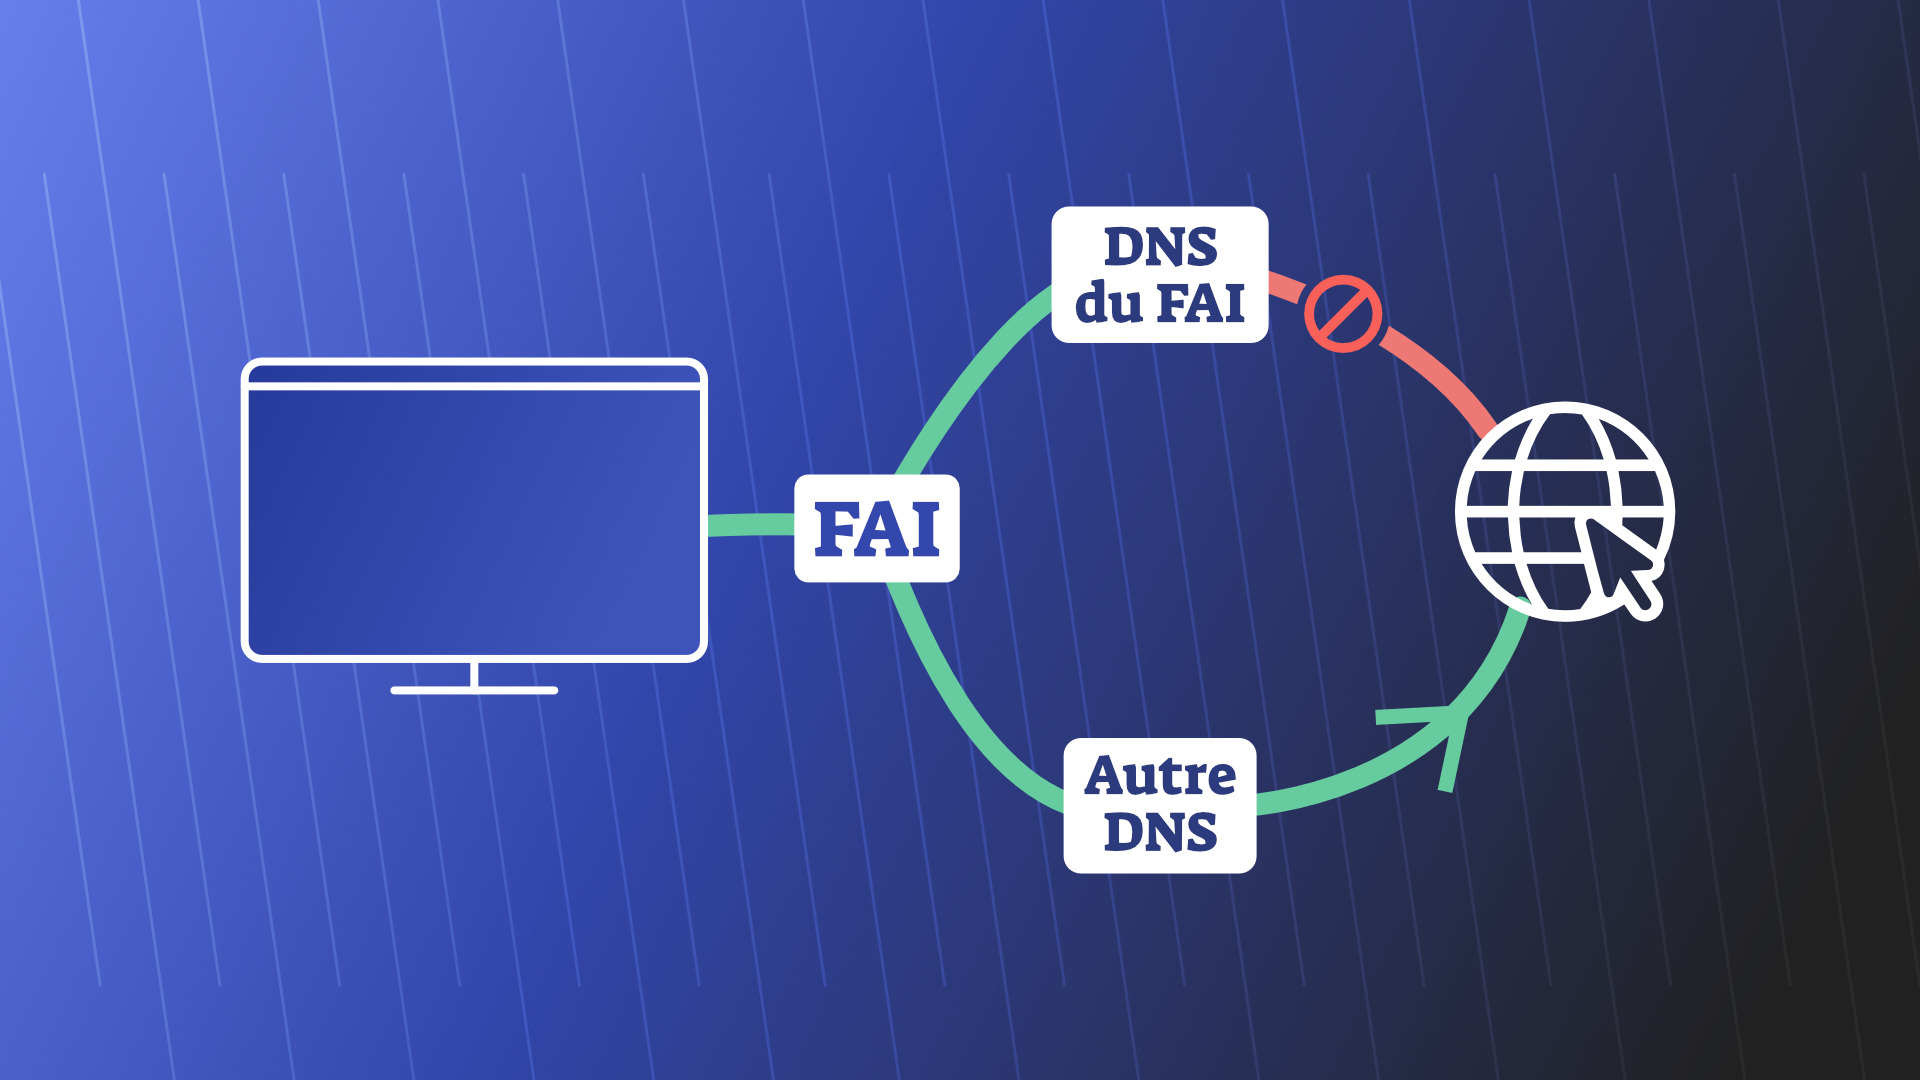 How to bypass DNS block?